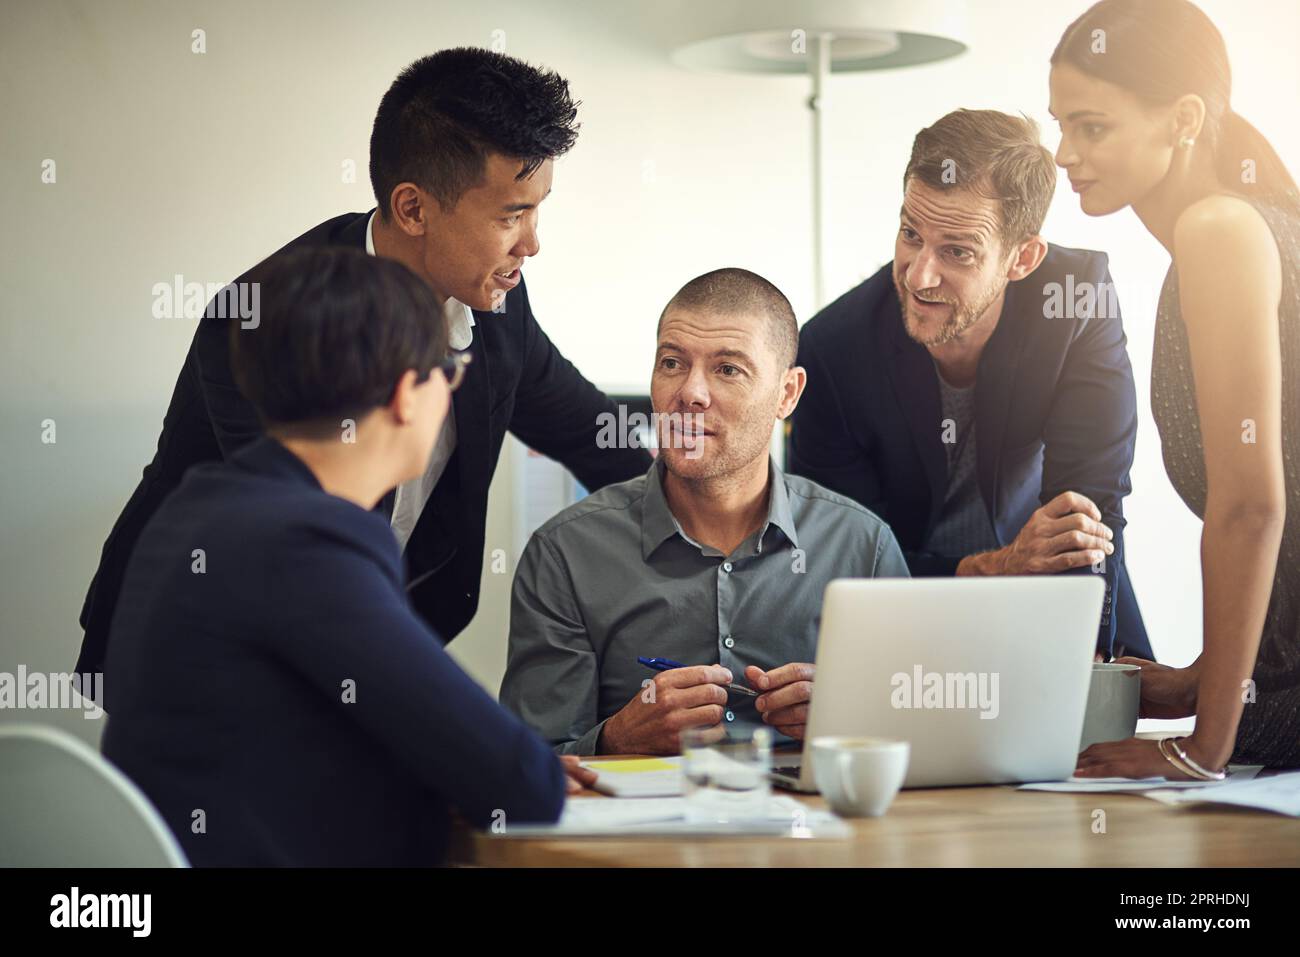 Assigning his team members according to their specialization. a group of coworkers discussing something on a laptop during a meeting. Stock Photo